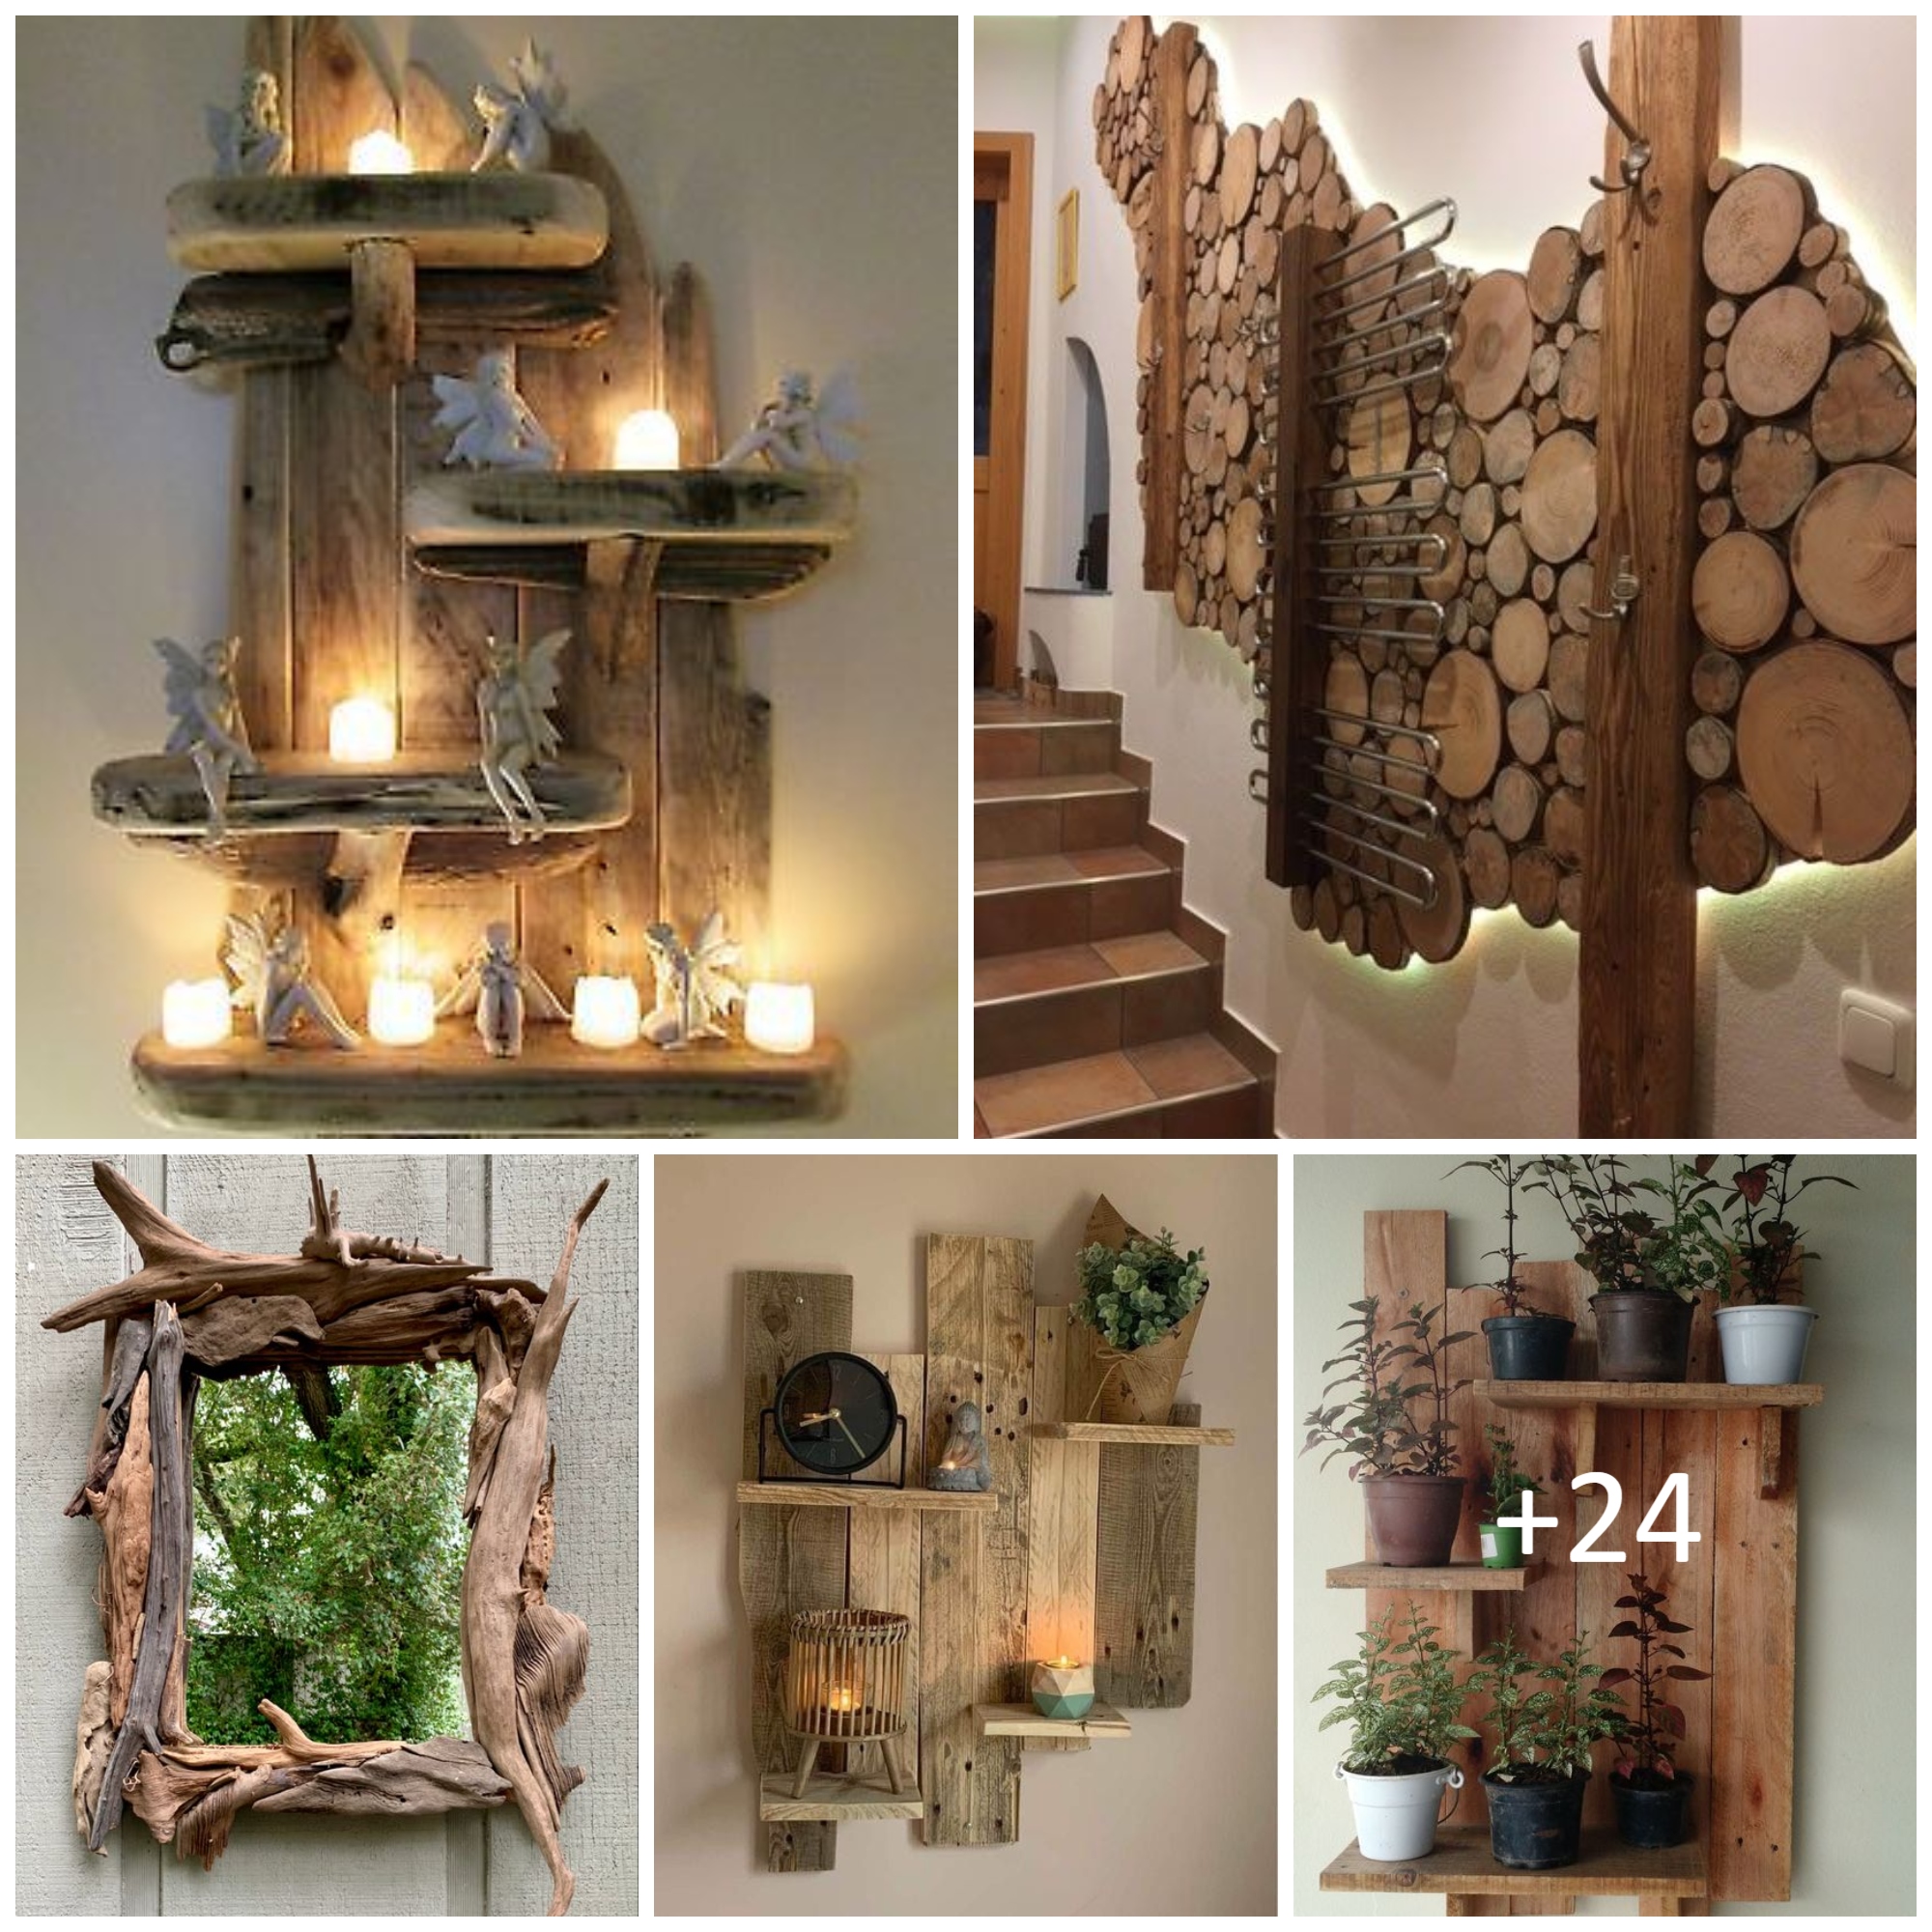 Woodworking useful ideas & inspirations for your home